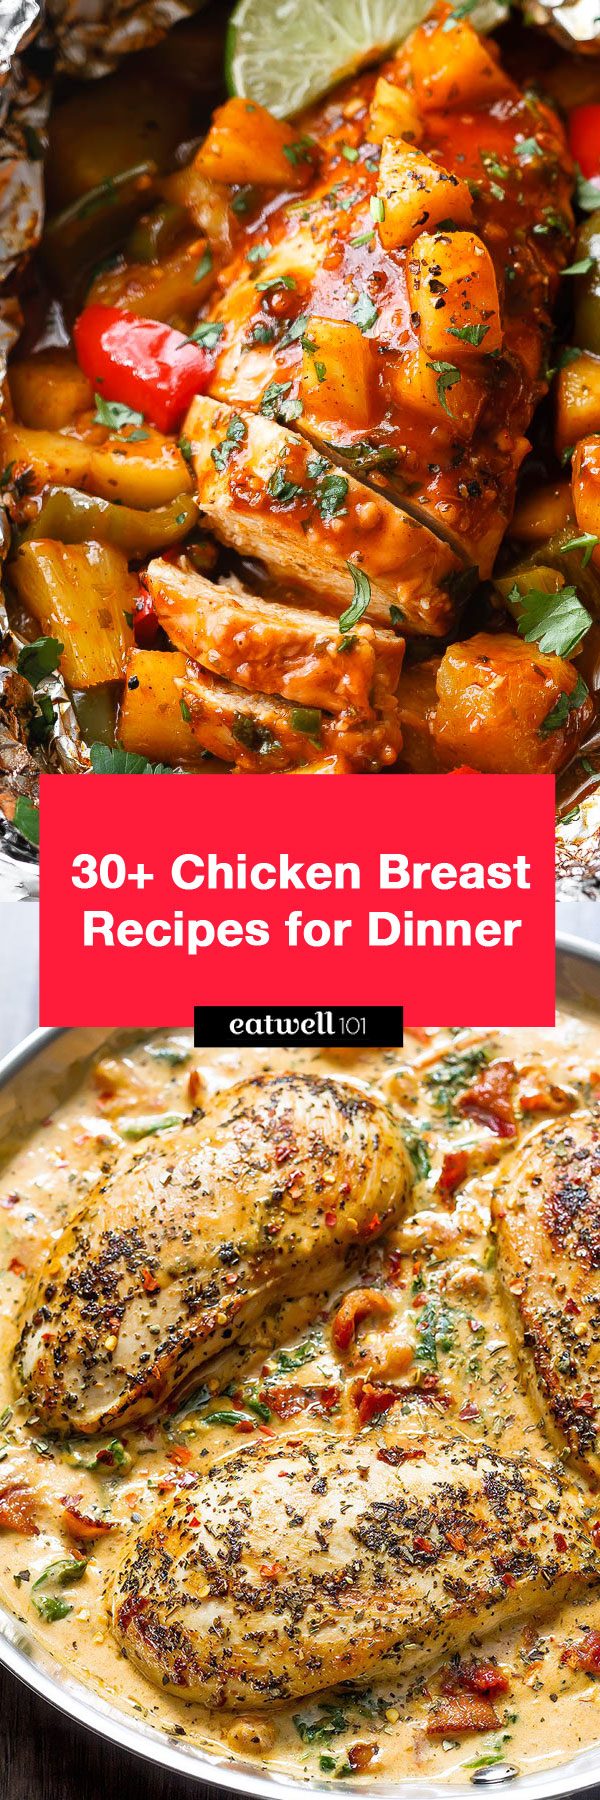 Chicken Breast Recipes: 40 Simple Chicken Breasts Meals for Dinner ...